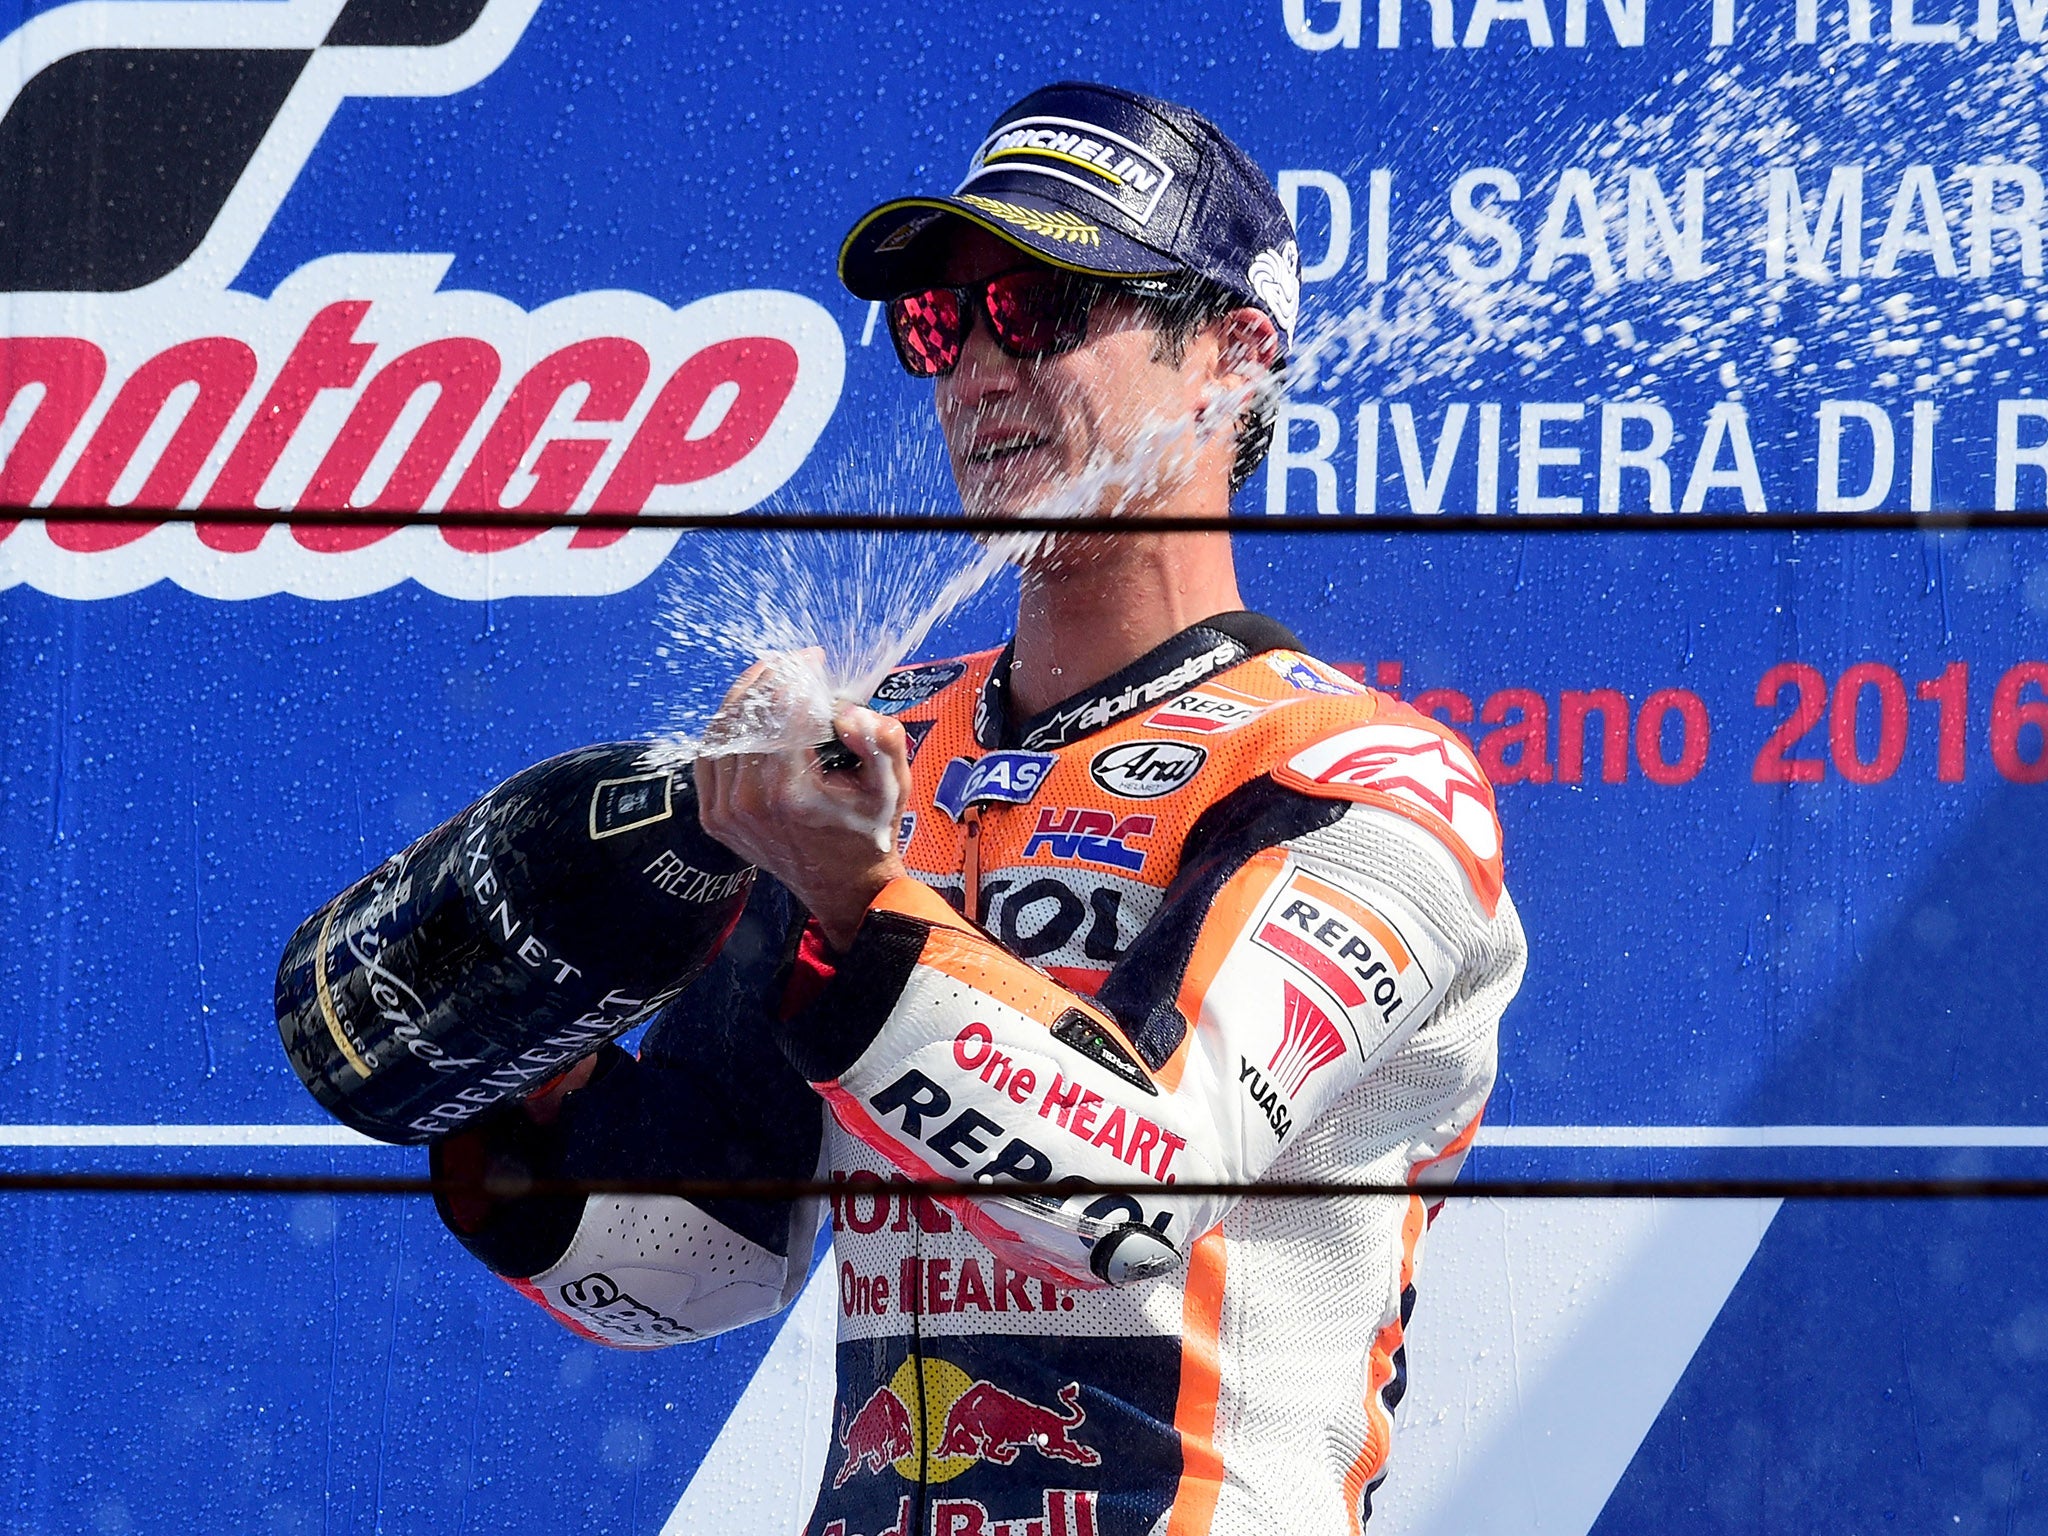 Dani Pedrosa won for the first time since October